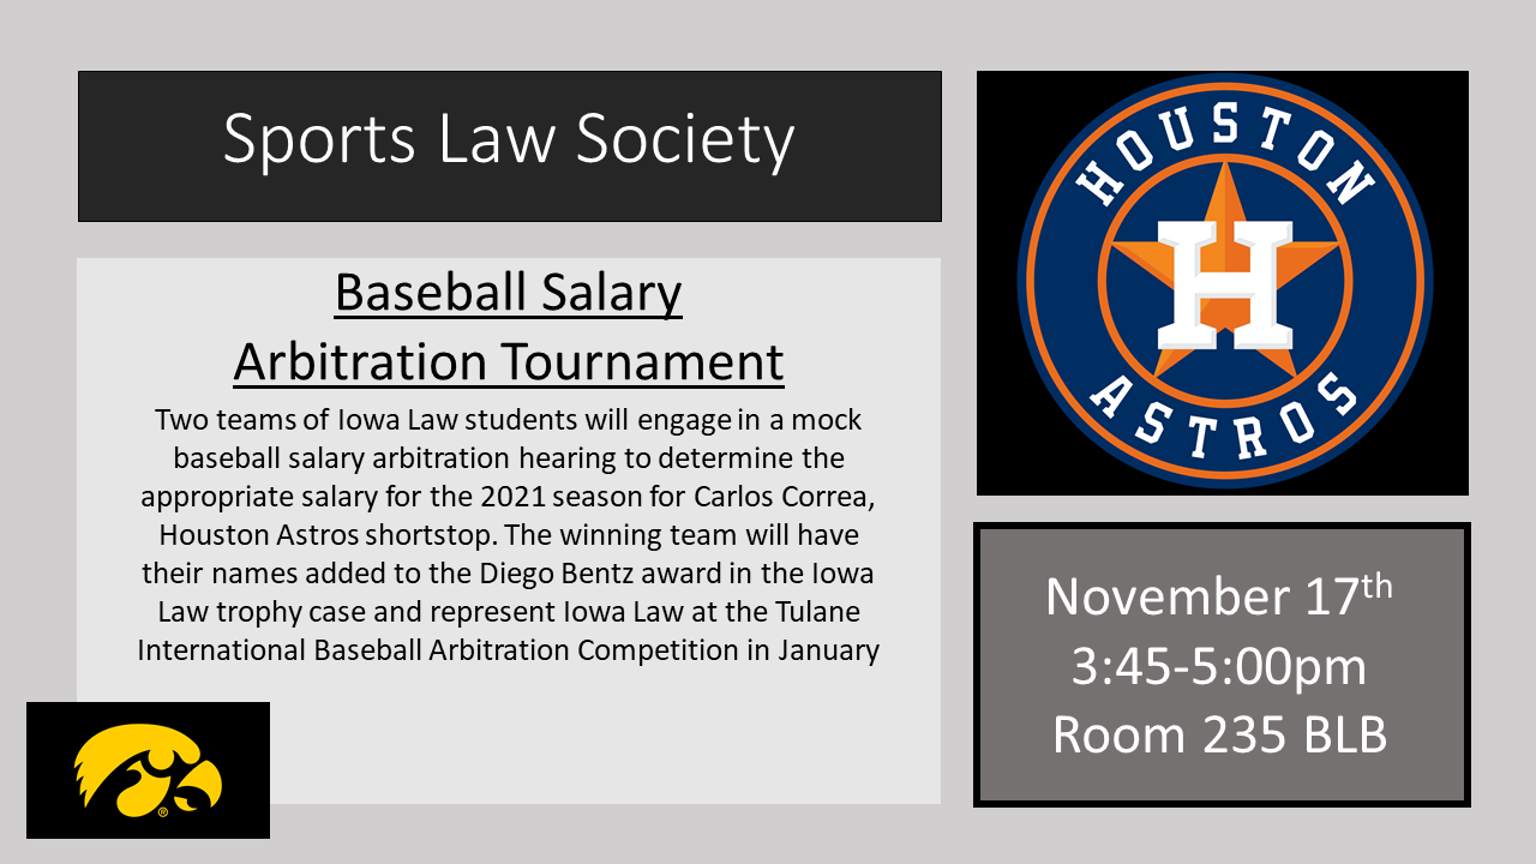  Sports Law Society    Baseball Salary Arbitration Tournament        Two teams of Iowa Law students will engage in a mock baseball salary arbitration hearing to determine the appropriate salary for the 2021 season for Carlos Correa, Houston Astros shortstop. The winning team will have their names added to the Diego Bentz award in the Iowa Law trophy case and represent Iowa Law at the Tulane International Baseball Arbitration Competition in January        November 17th    3:45-5:00pm    Room 235 BLB